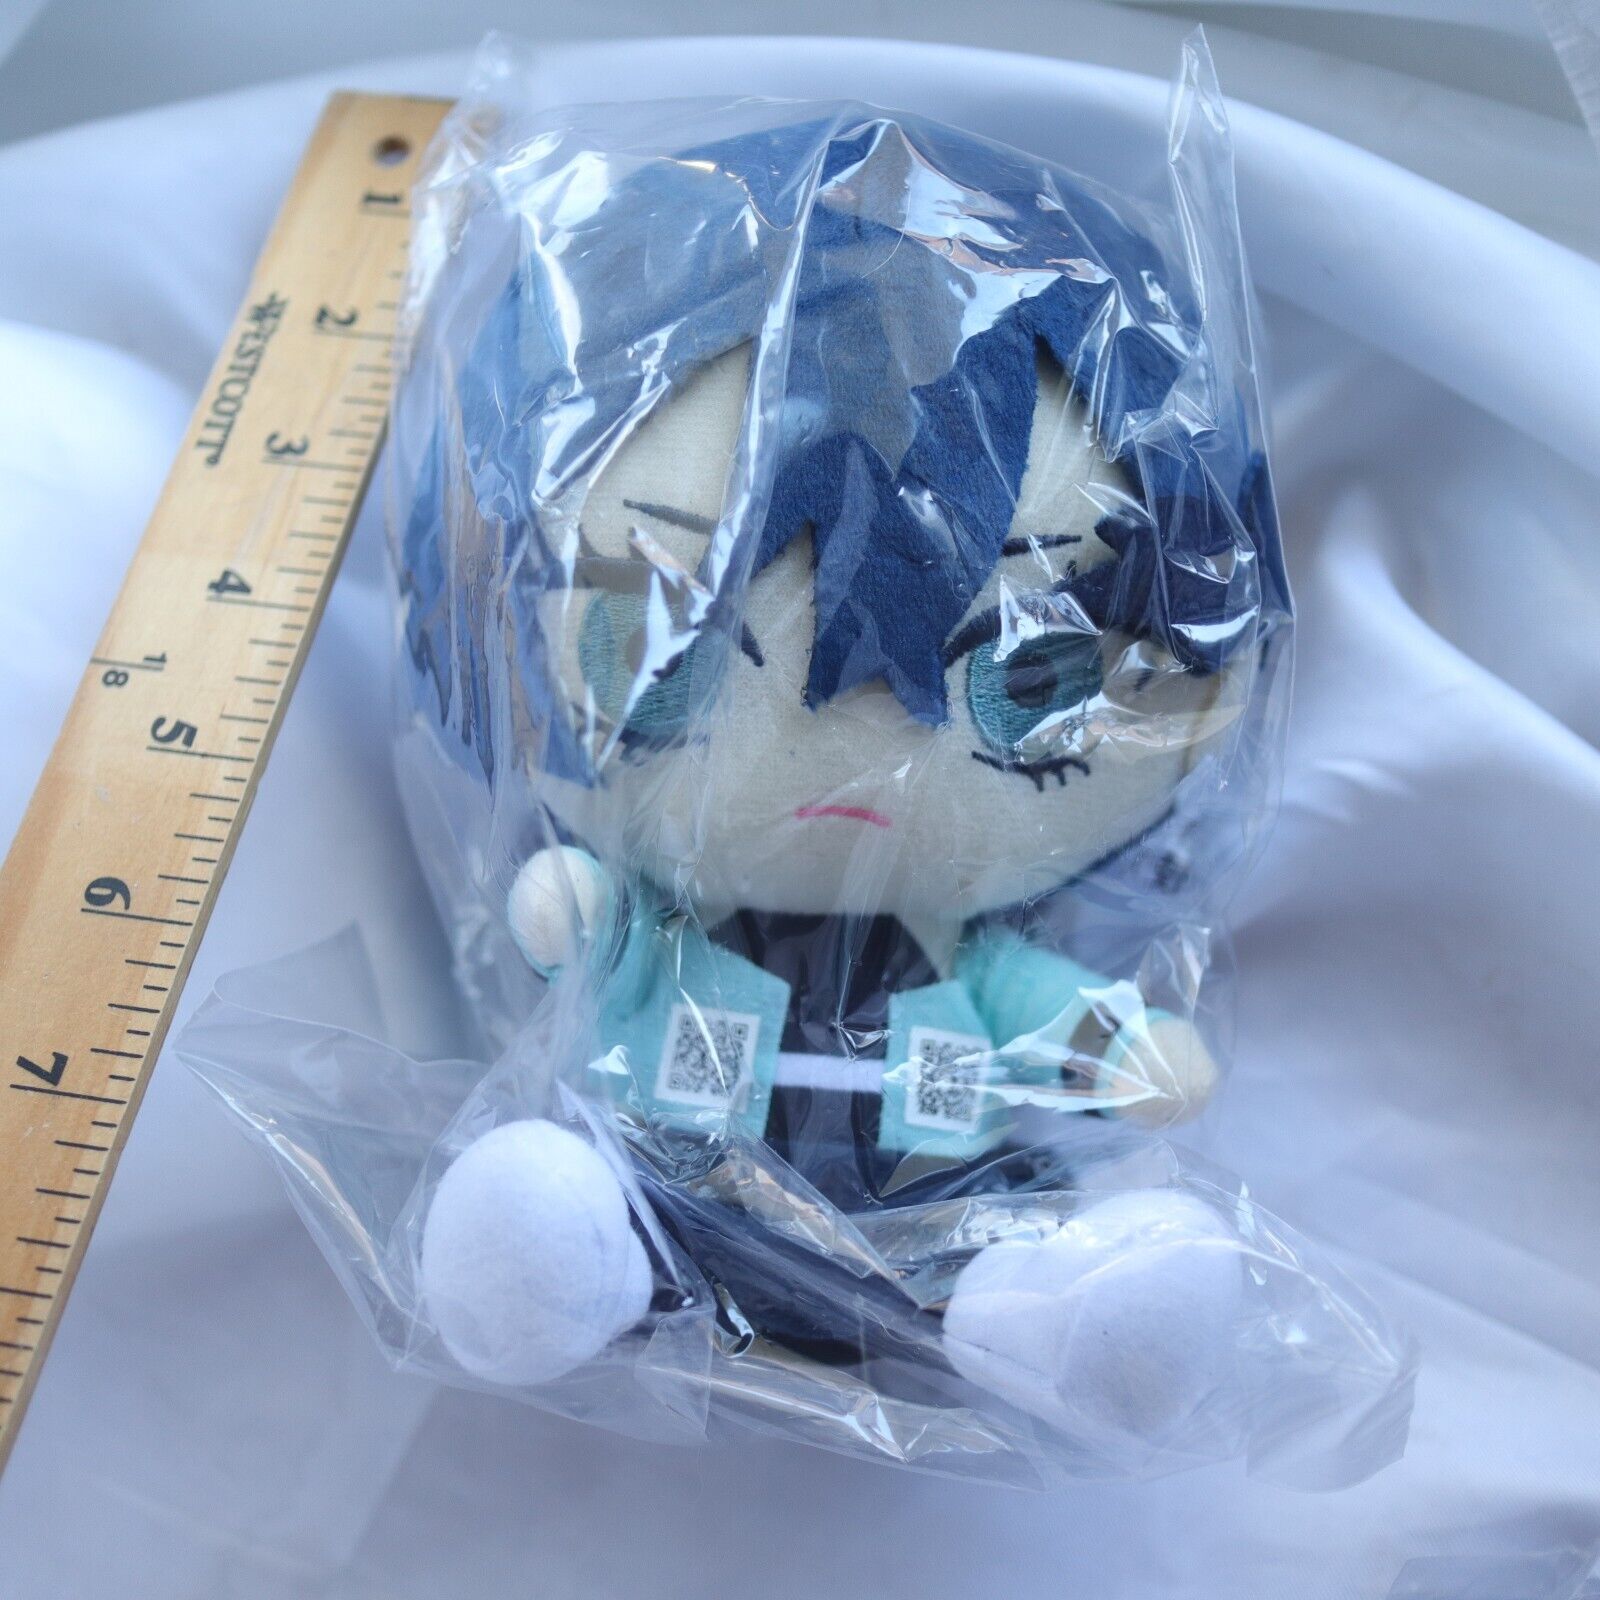 Ado Au Collaboration Collection Missing Plush Toy US SELLER